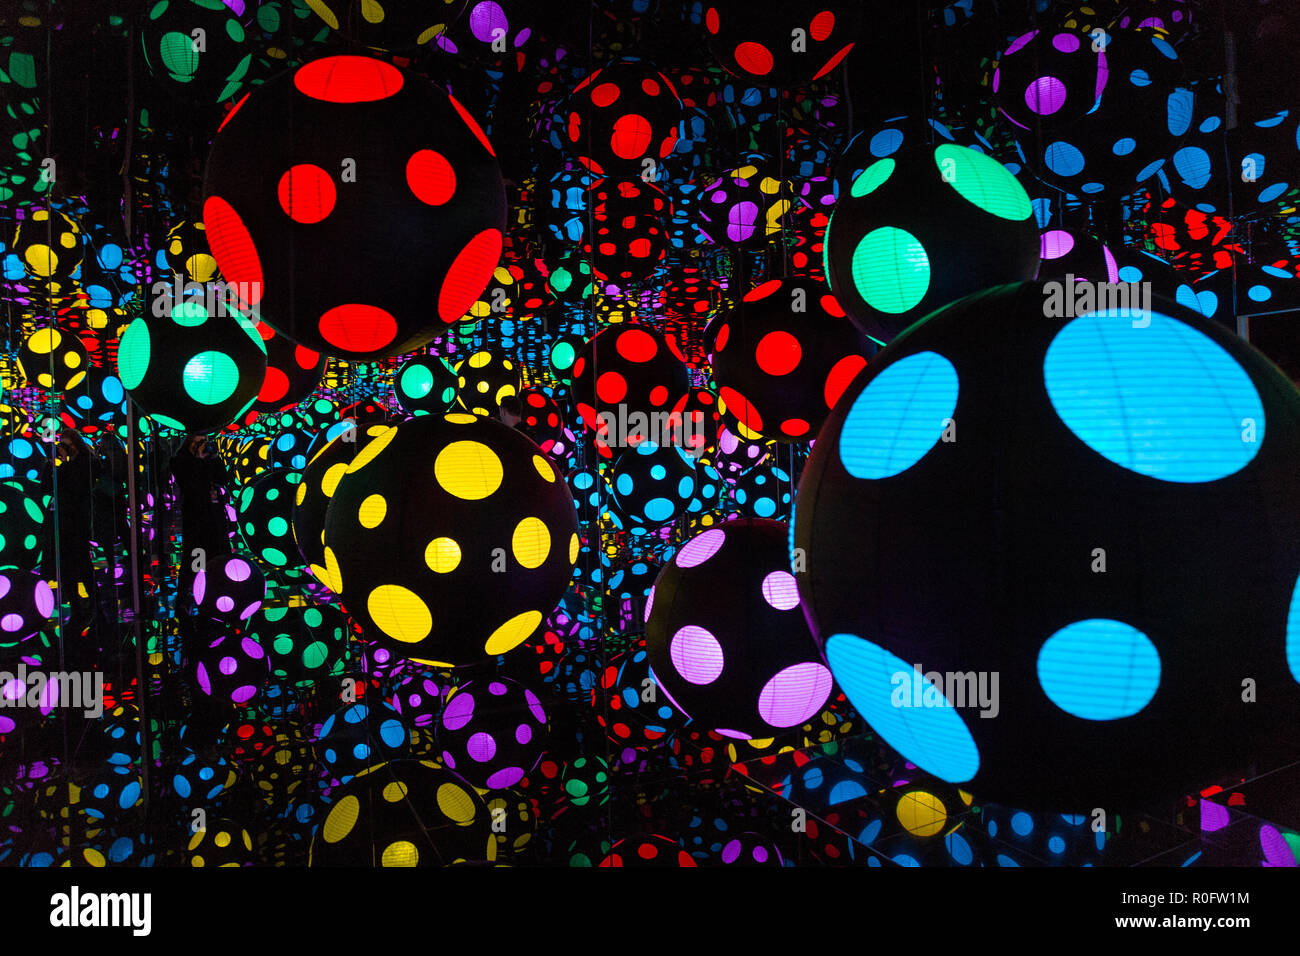 Paper lanterns of the 'My Heart is Dancing into the Universe' Infinity Mirrored Room by Yayoi Kusama at the Victoria Miro 2018, London, UK Stock Photo